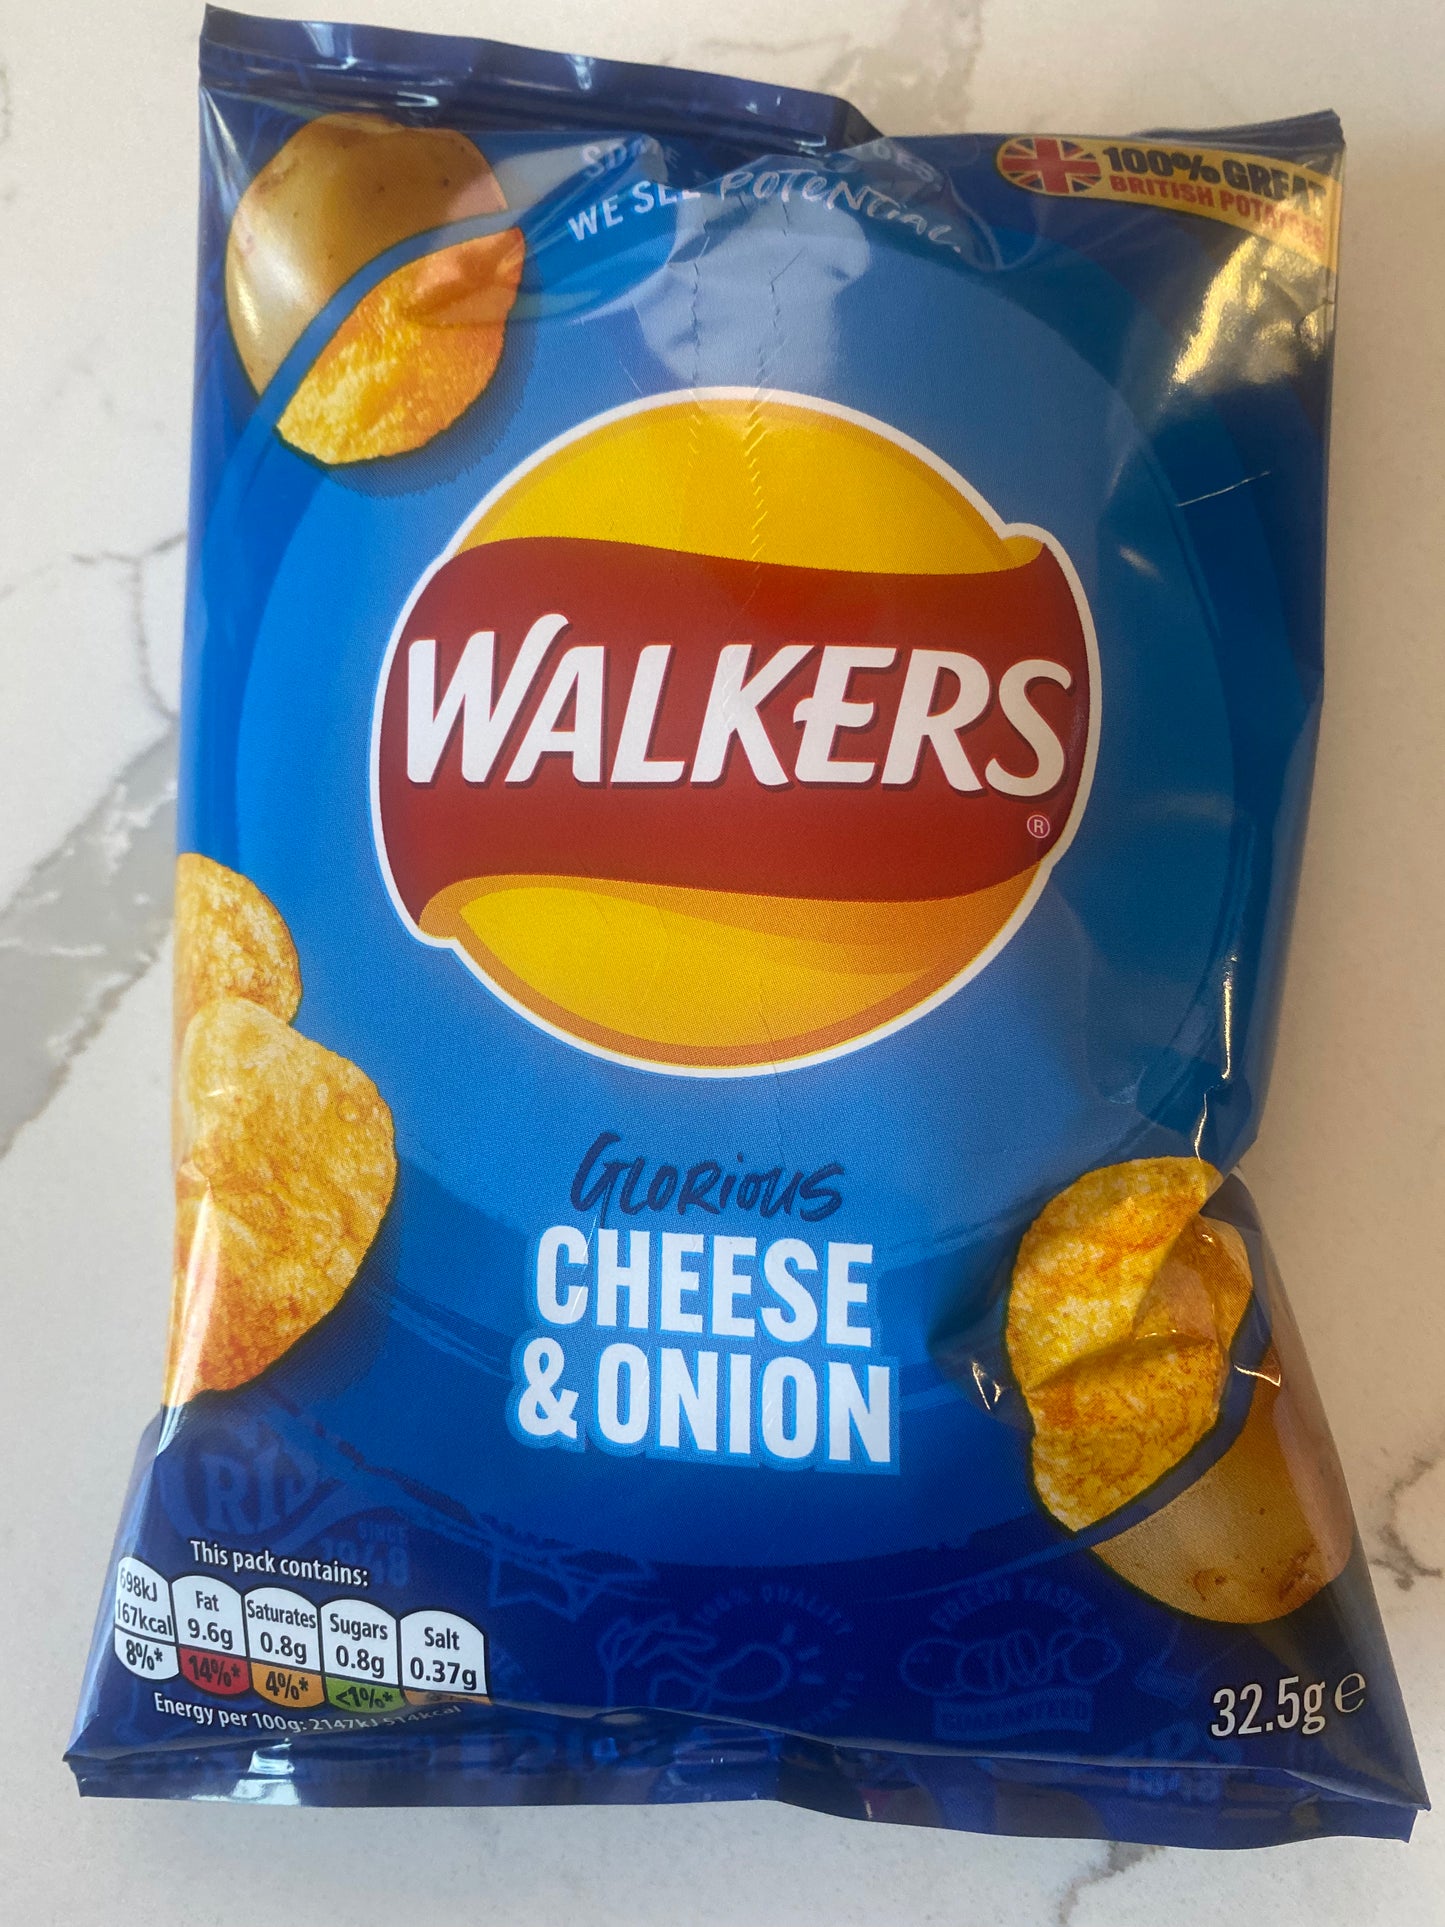 Walkers cheese and onion chips